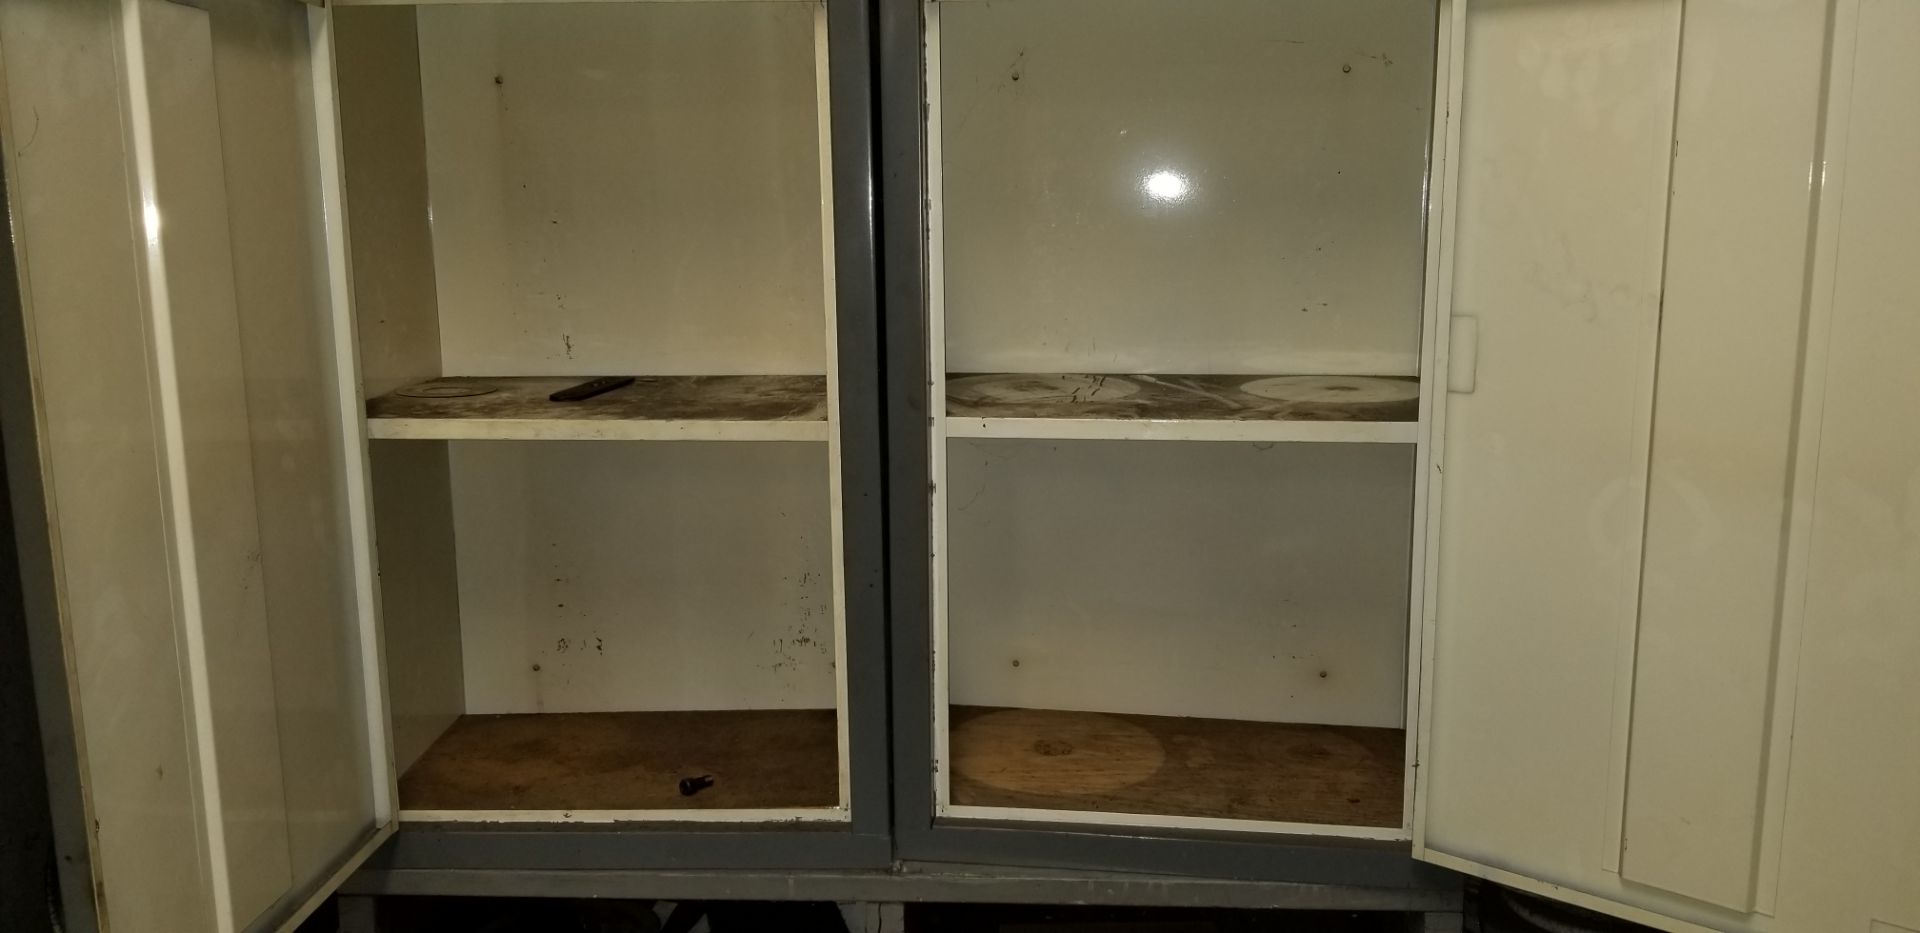 Pair of 15x24" Metal Shop Cabinets - Image 2 of 2